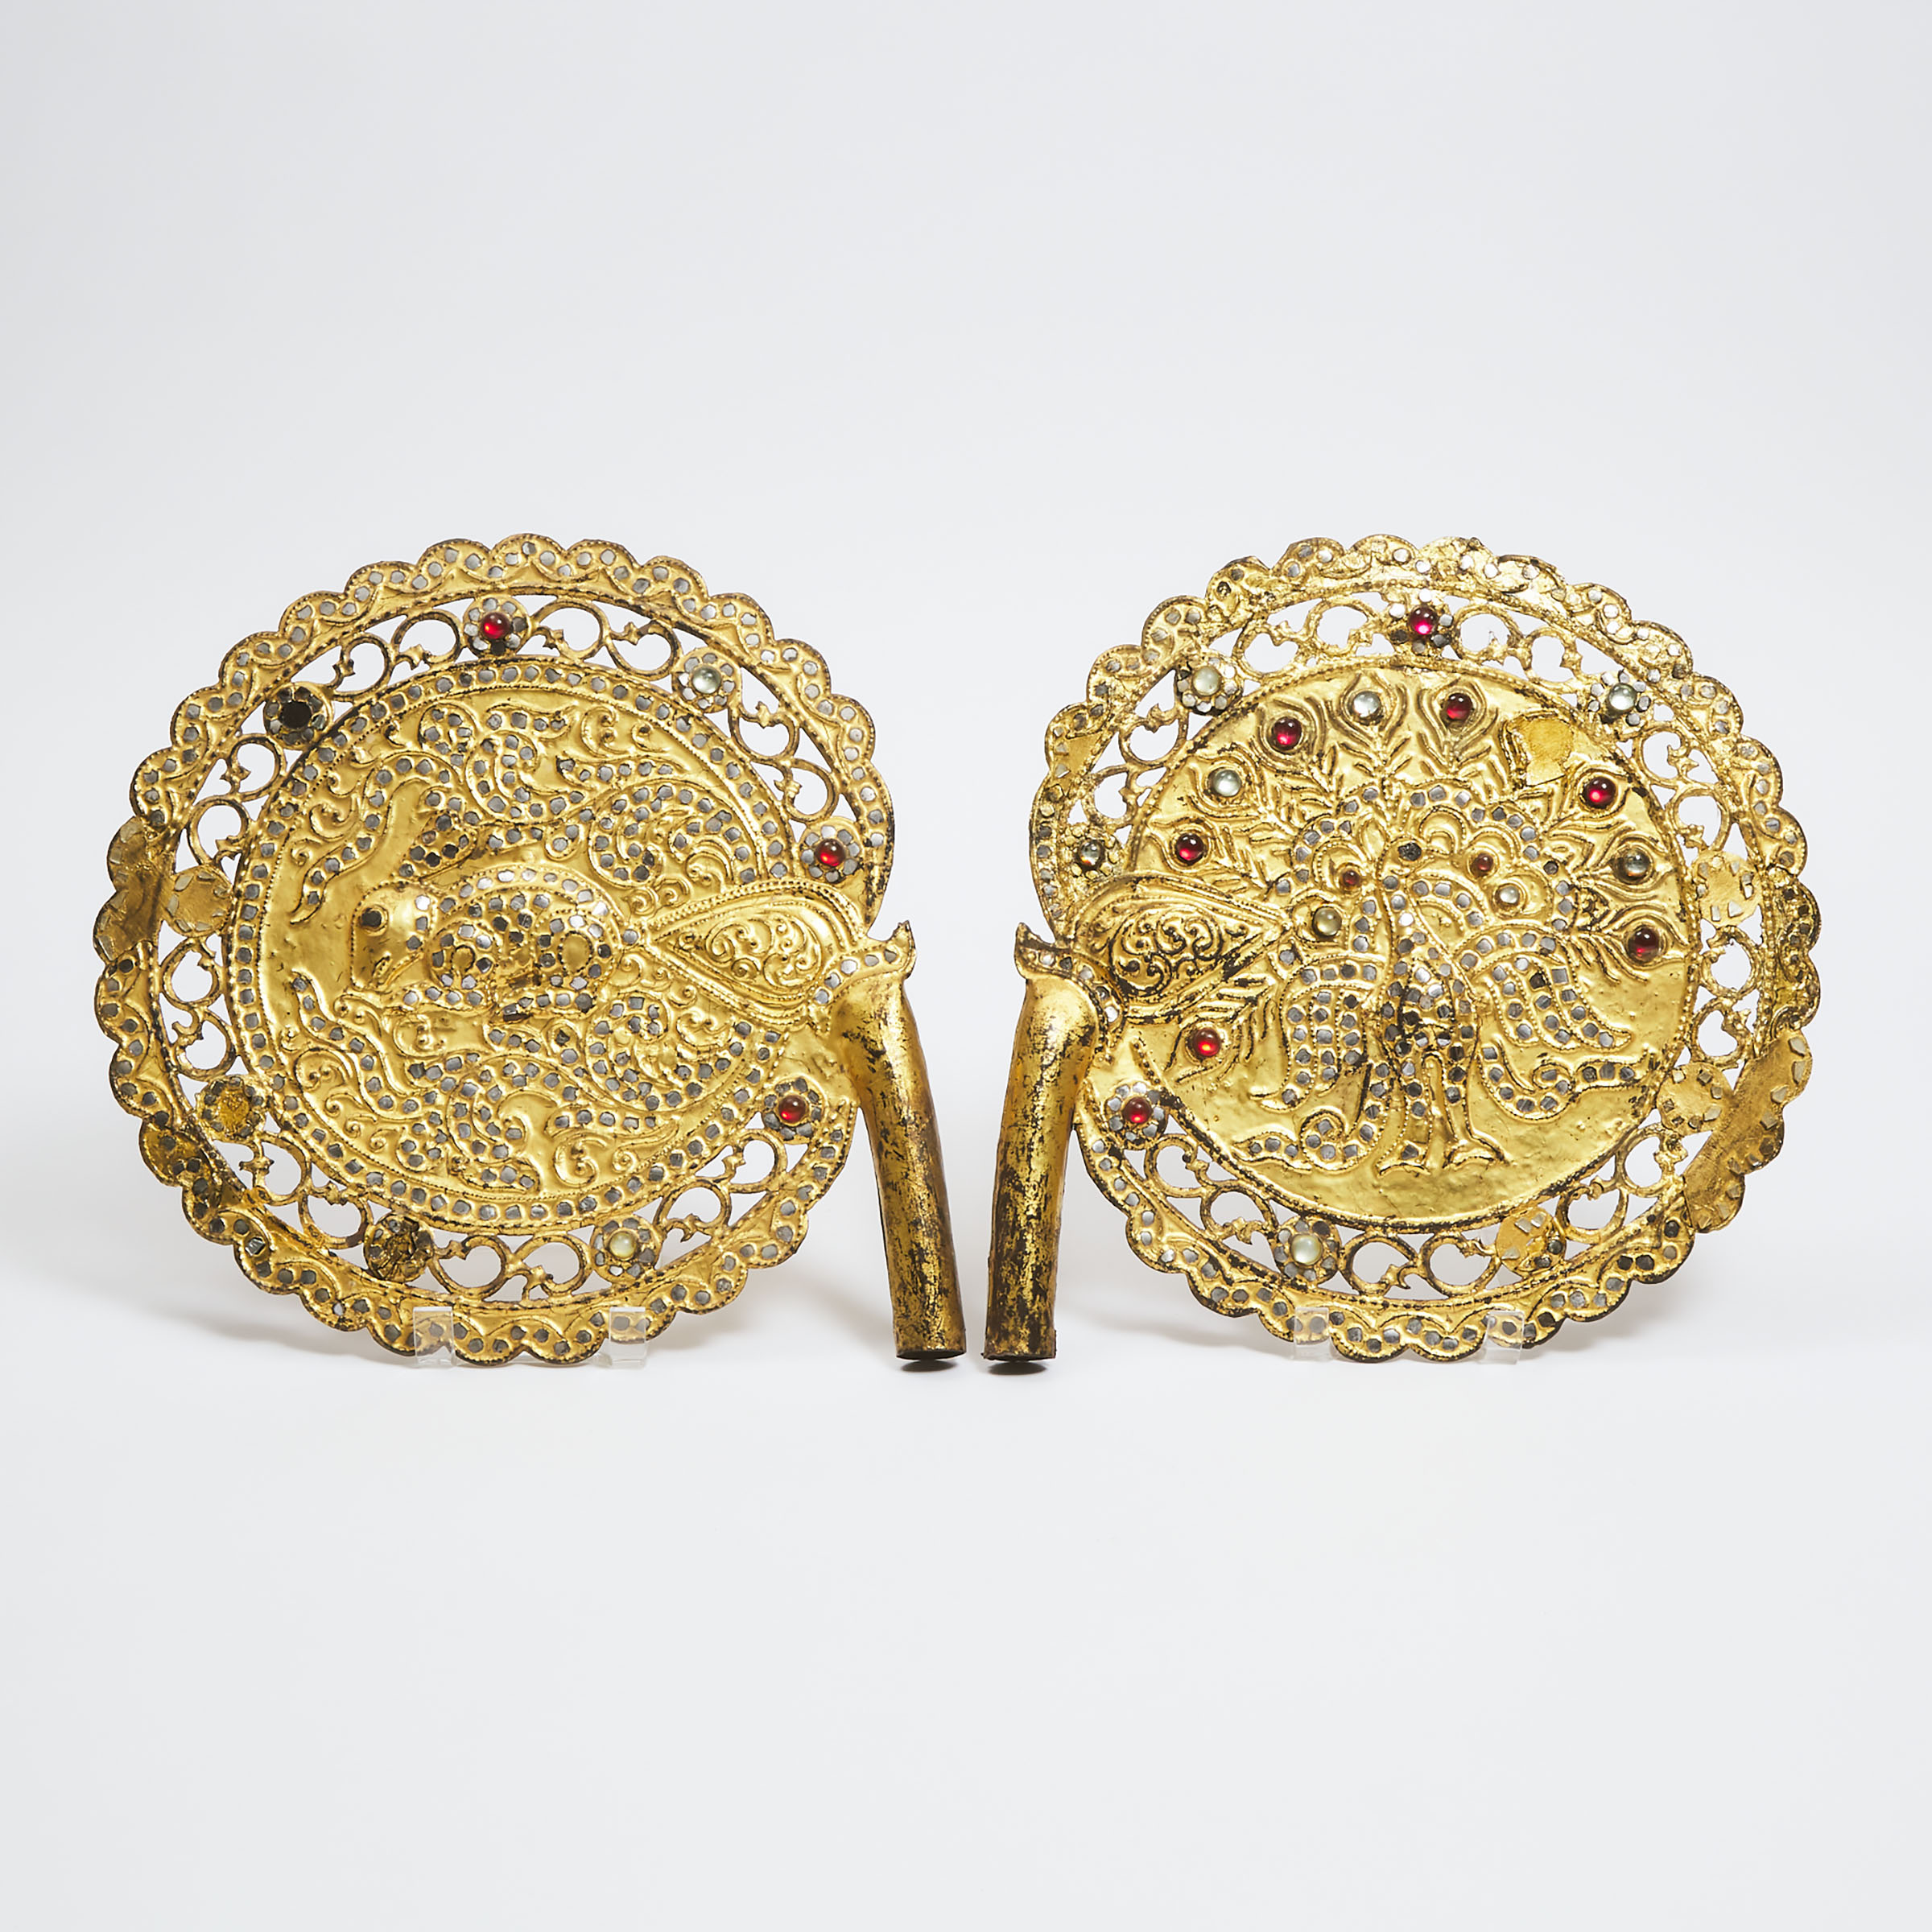 Pair of Burmese Gilt Lacquer Fans  3abefd